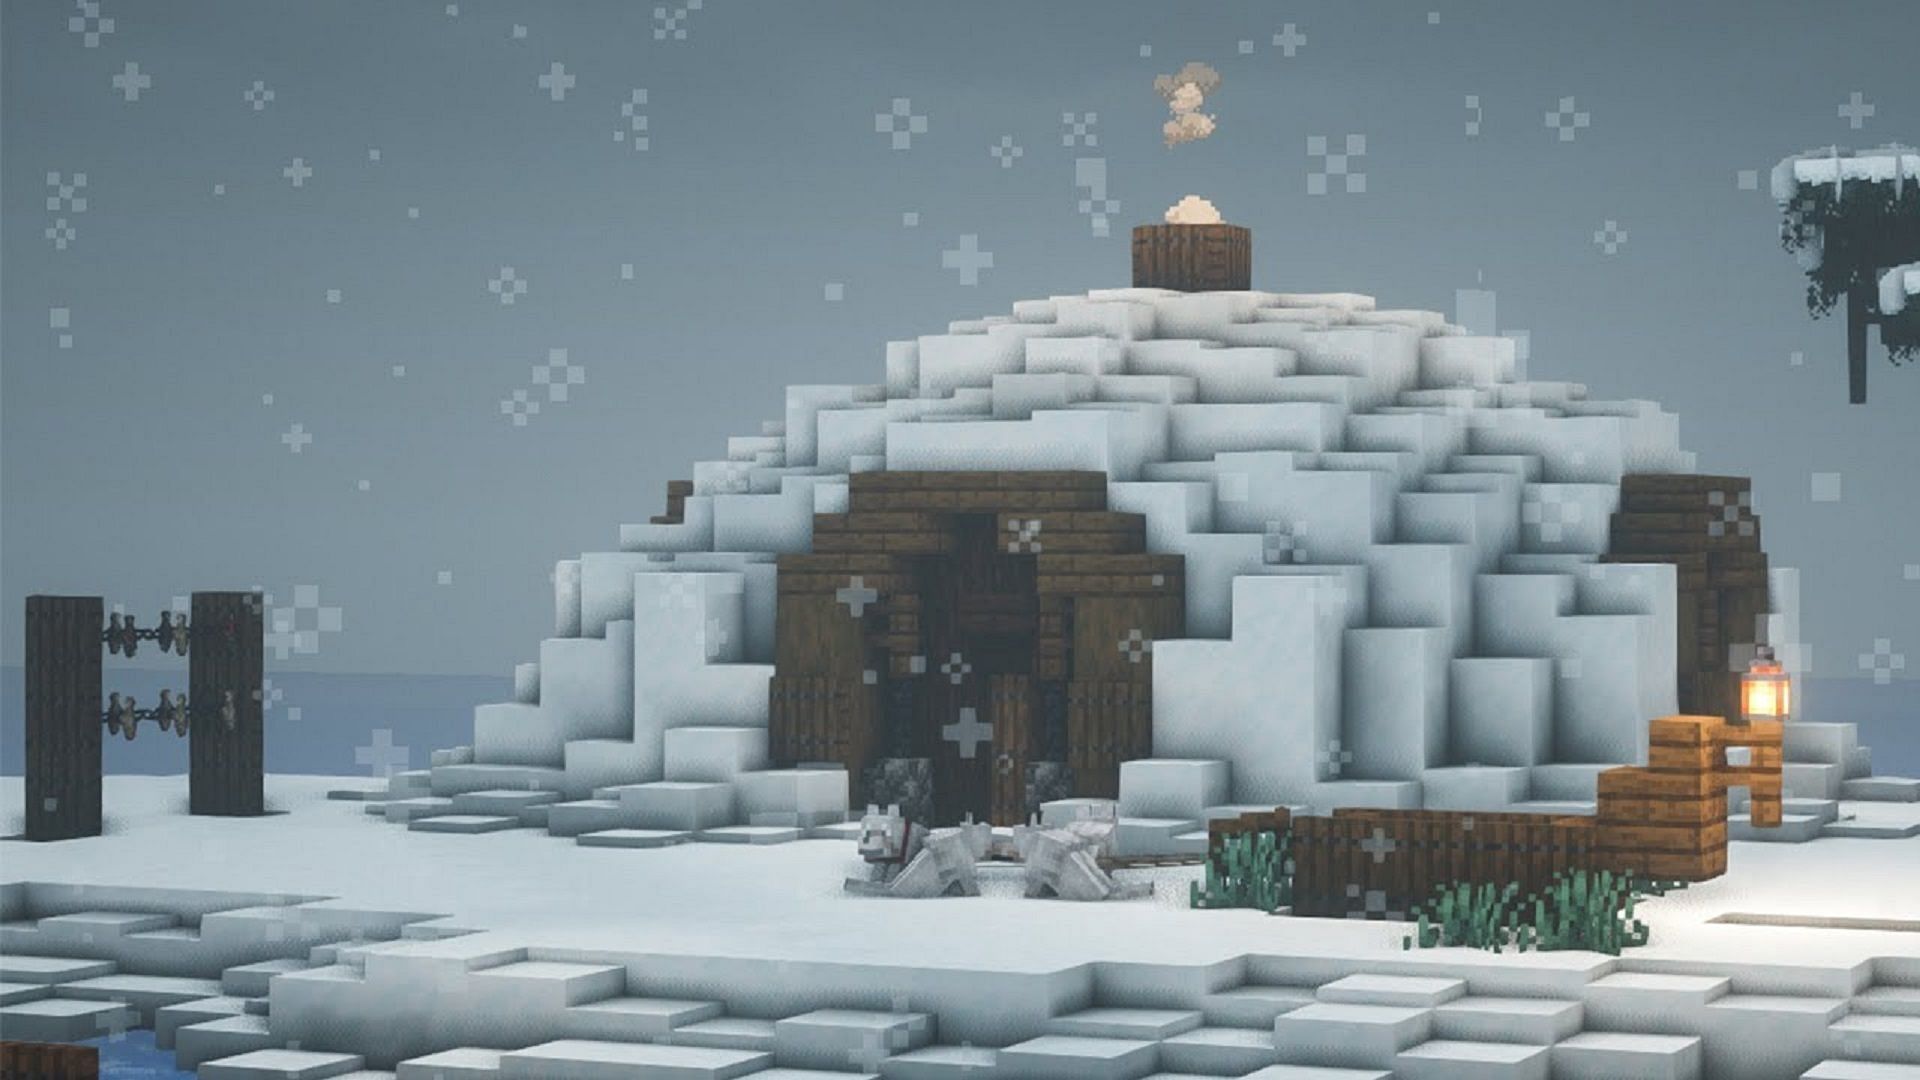 An igloo-styled cabin created by a Minecraft player (Image via Tokobuilds/YouTube)